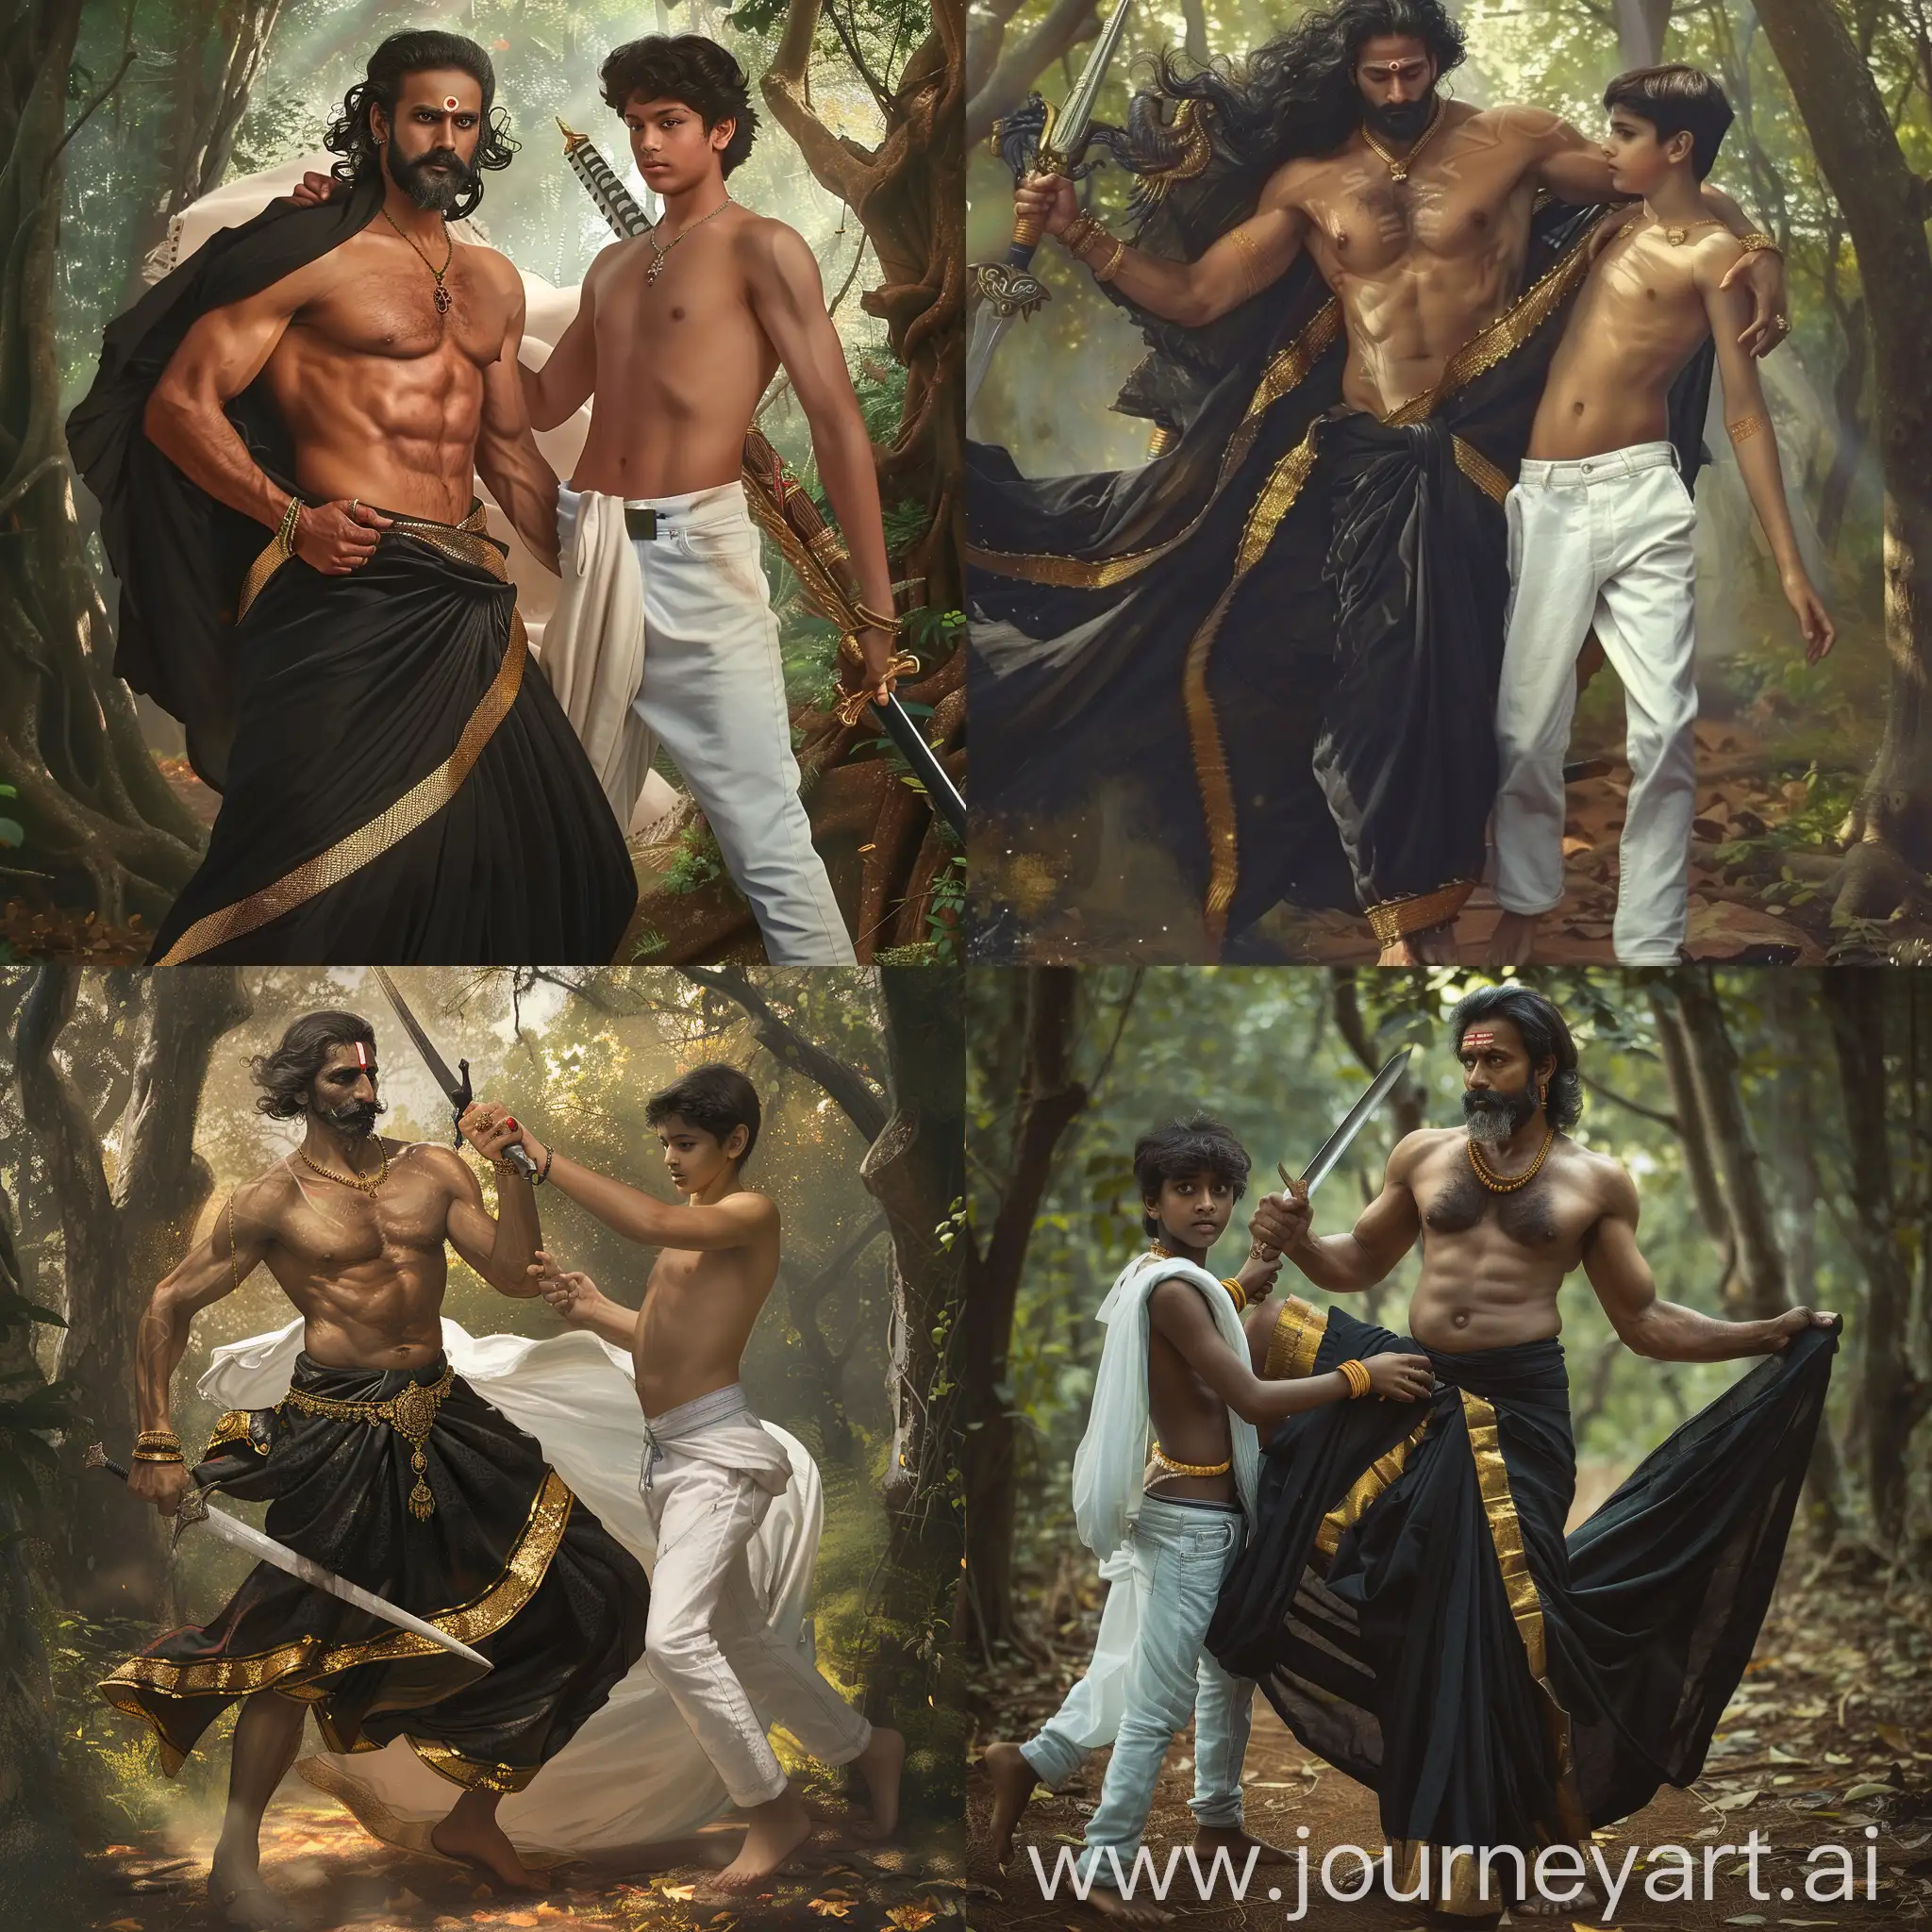 Timeless-Bond-Traditional-South-Indian-Warrior-and-Modern-Youth-in-a-WindSwept-Forest